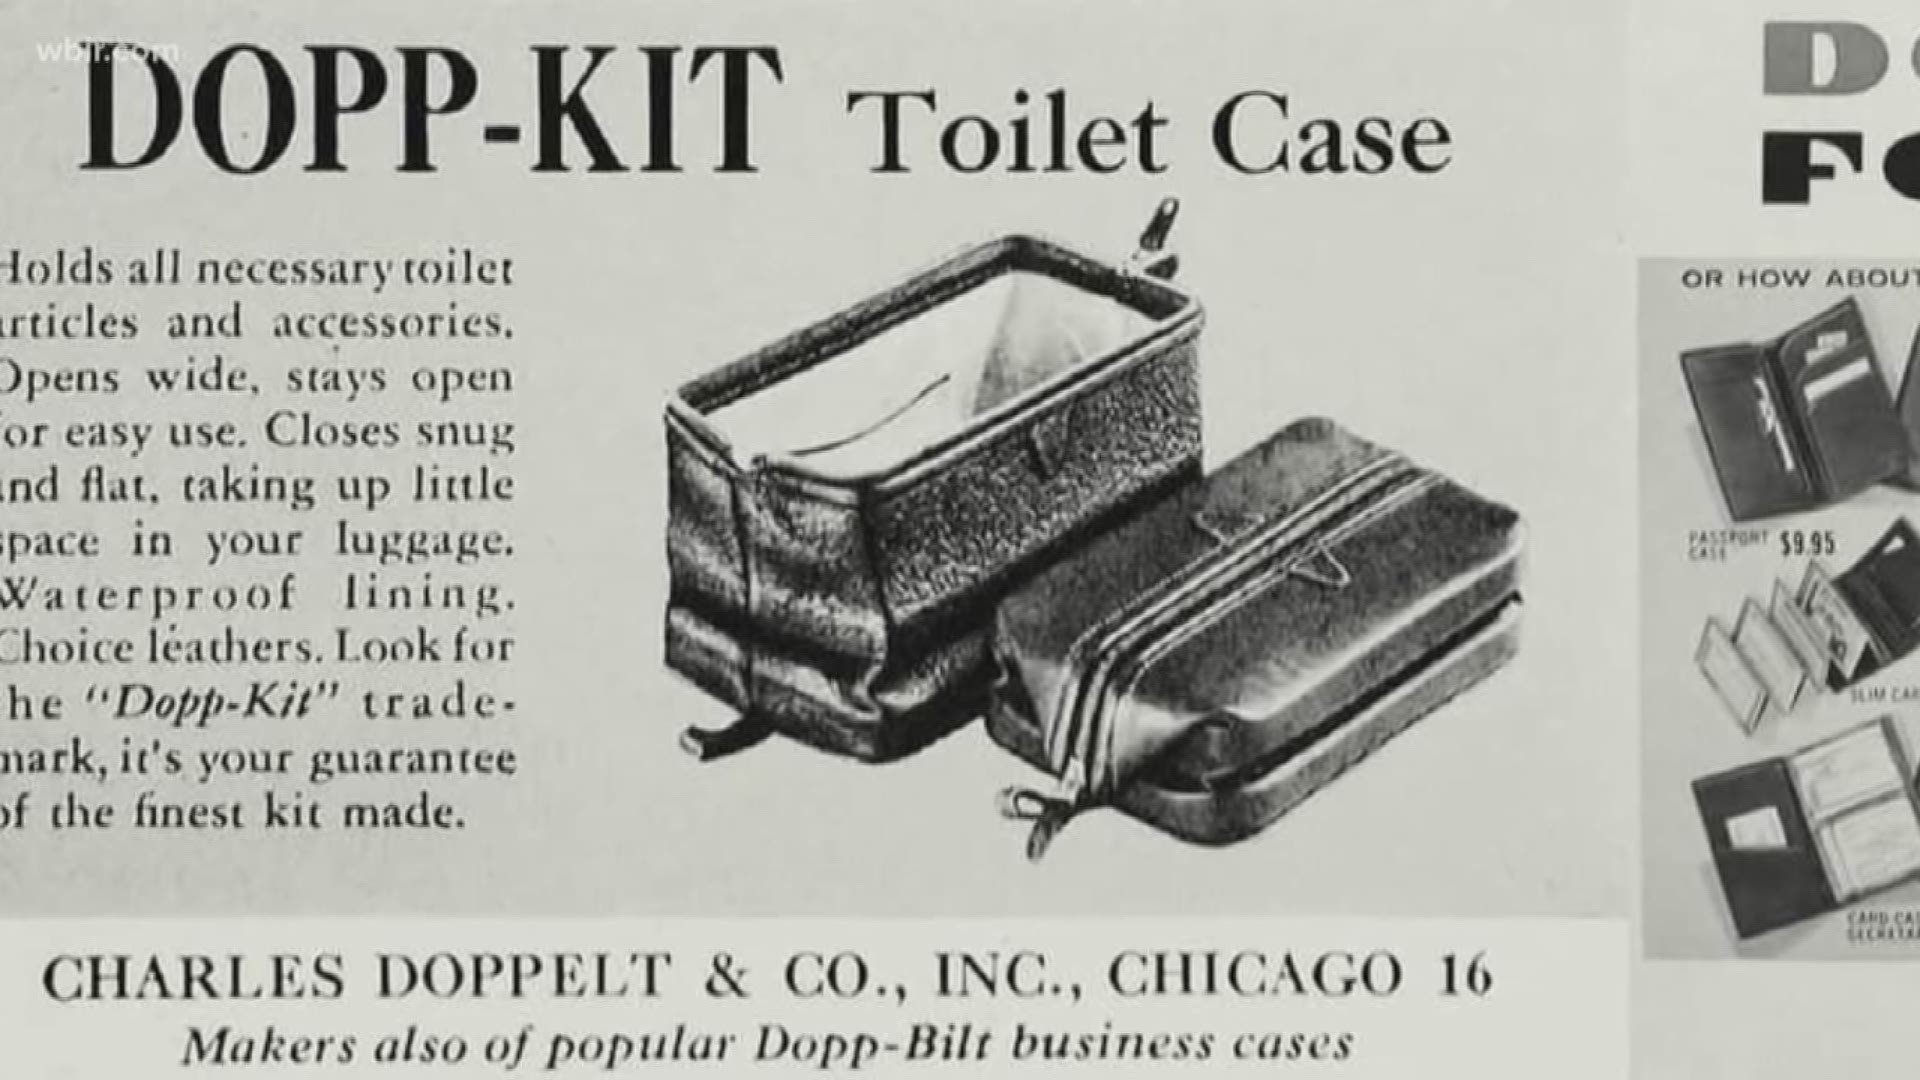 The nephew of Charles Doppelt, who invented the Dopp kit, lives in Cedar Bluff.